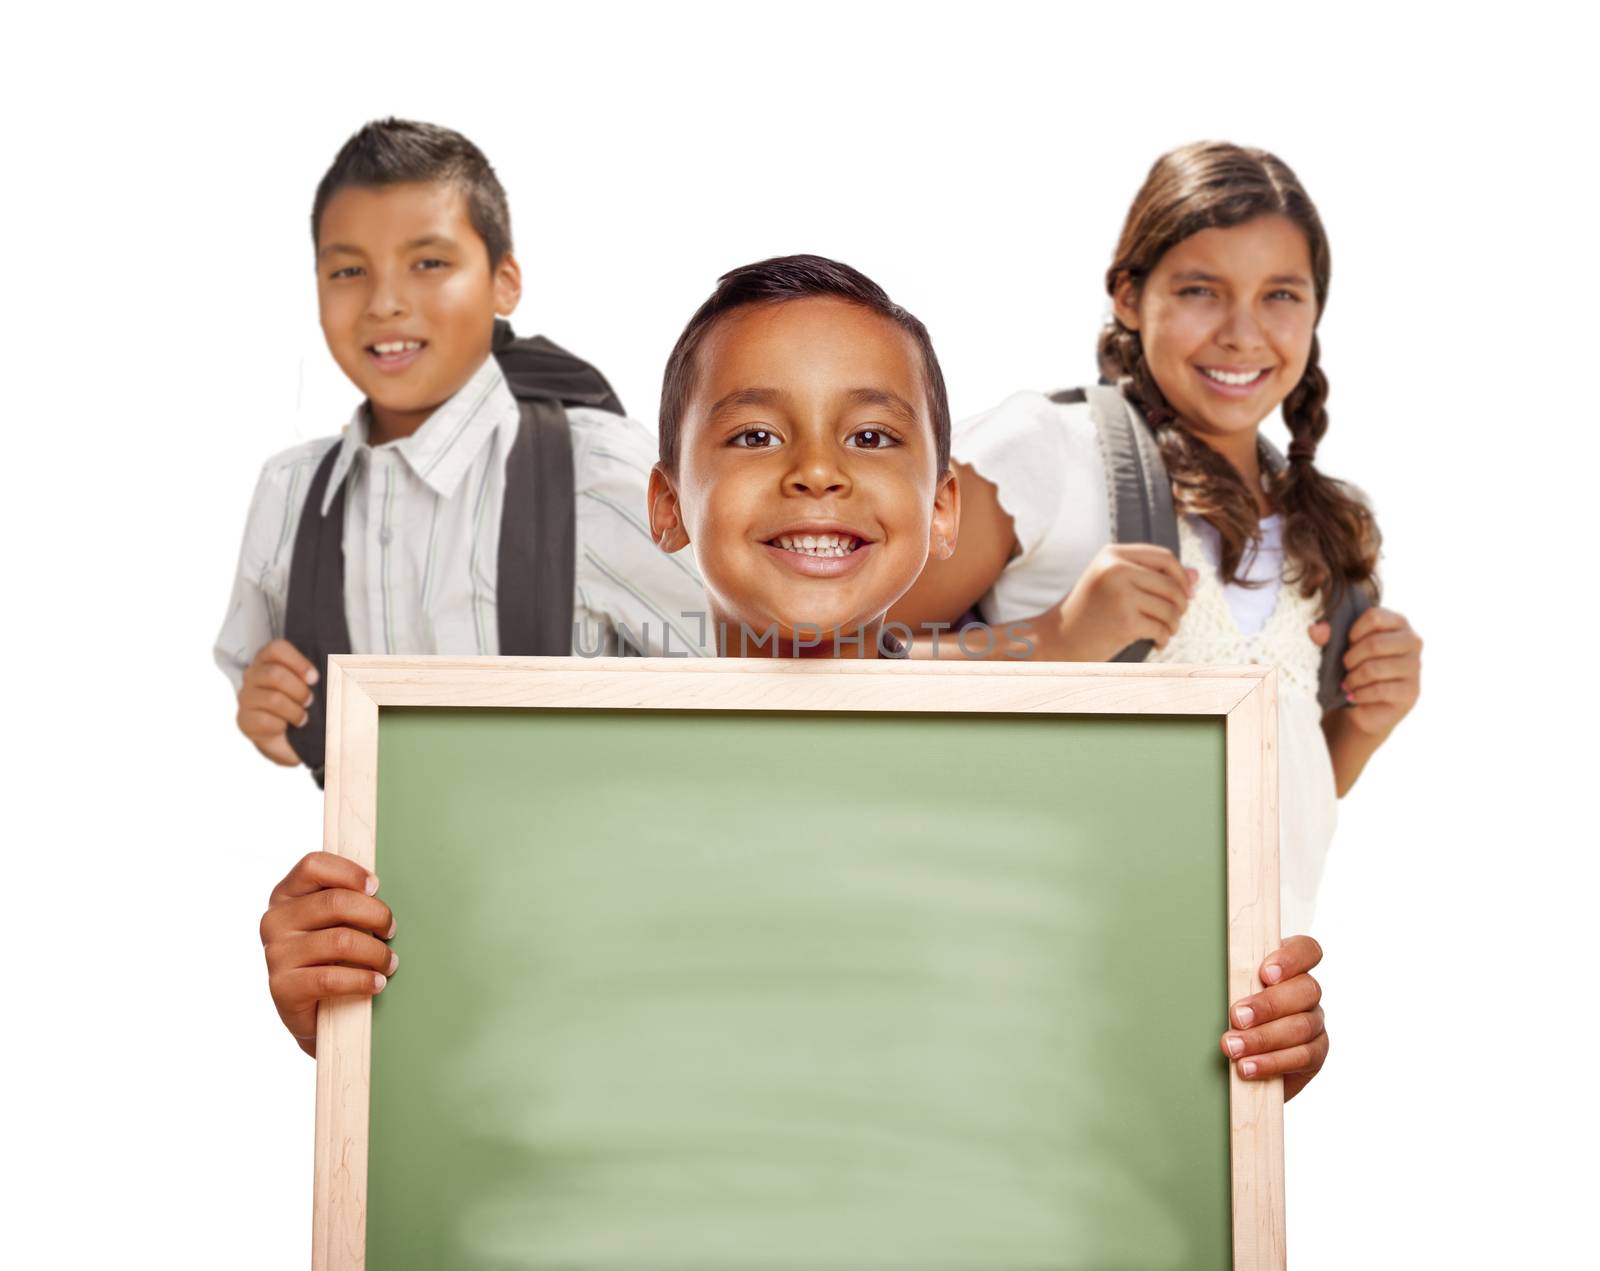 Smiling Happy Hispanic Boys and Girl Holding Blank Chalk Board Isolated on White.